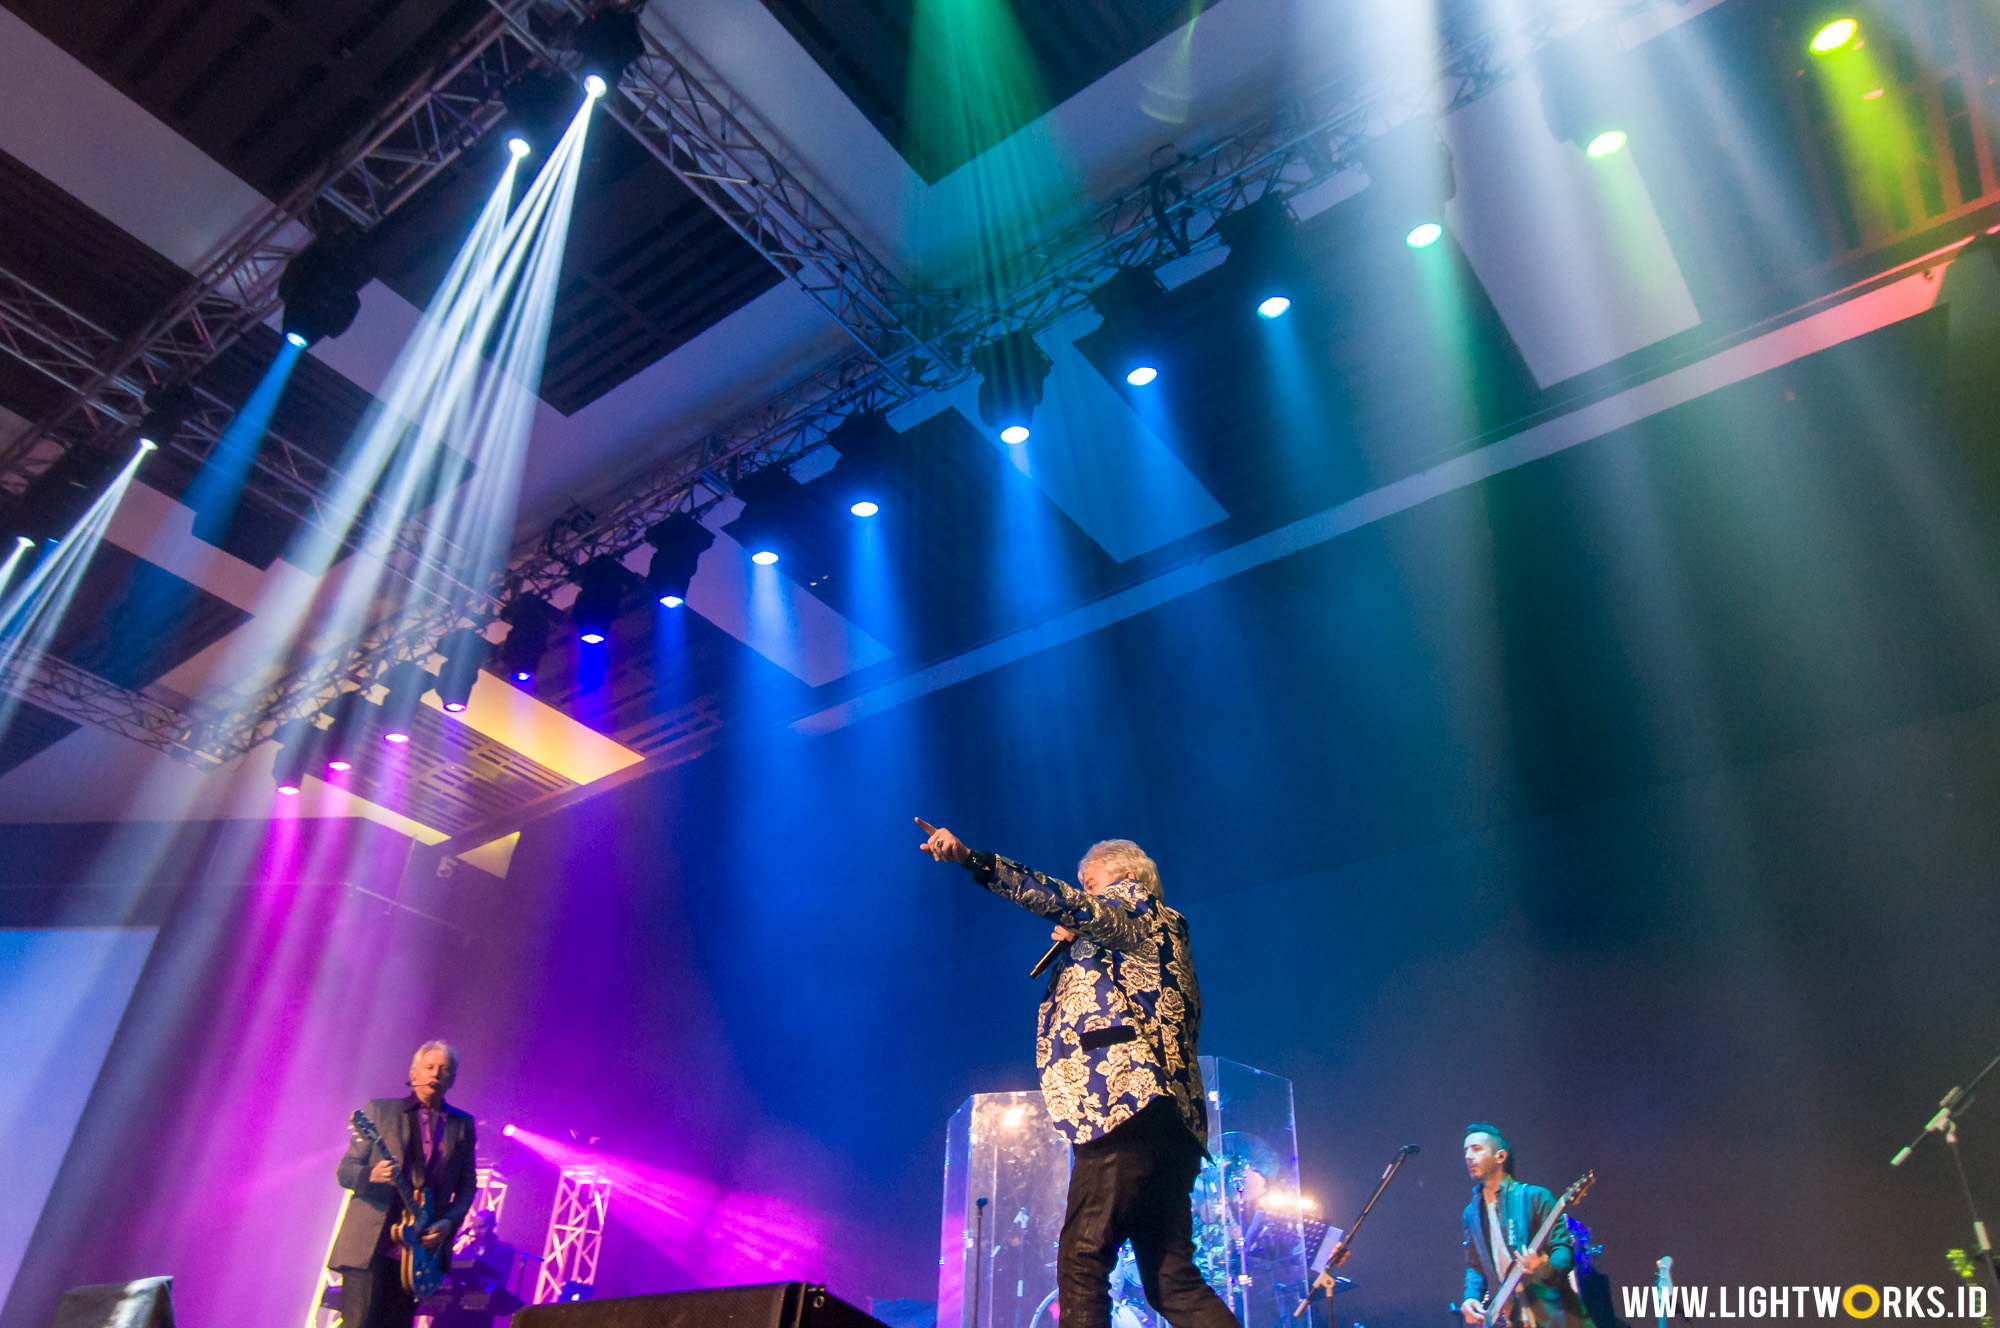 Air Supply Concert | Venue at Kota Kasablanka | Organised by Full Color Party | Sound system by Soundworks Jakarta | Lighting equipment by Lightwoks